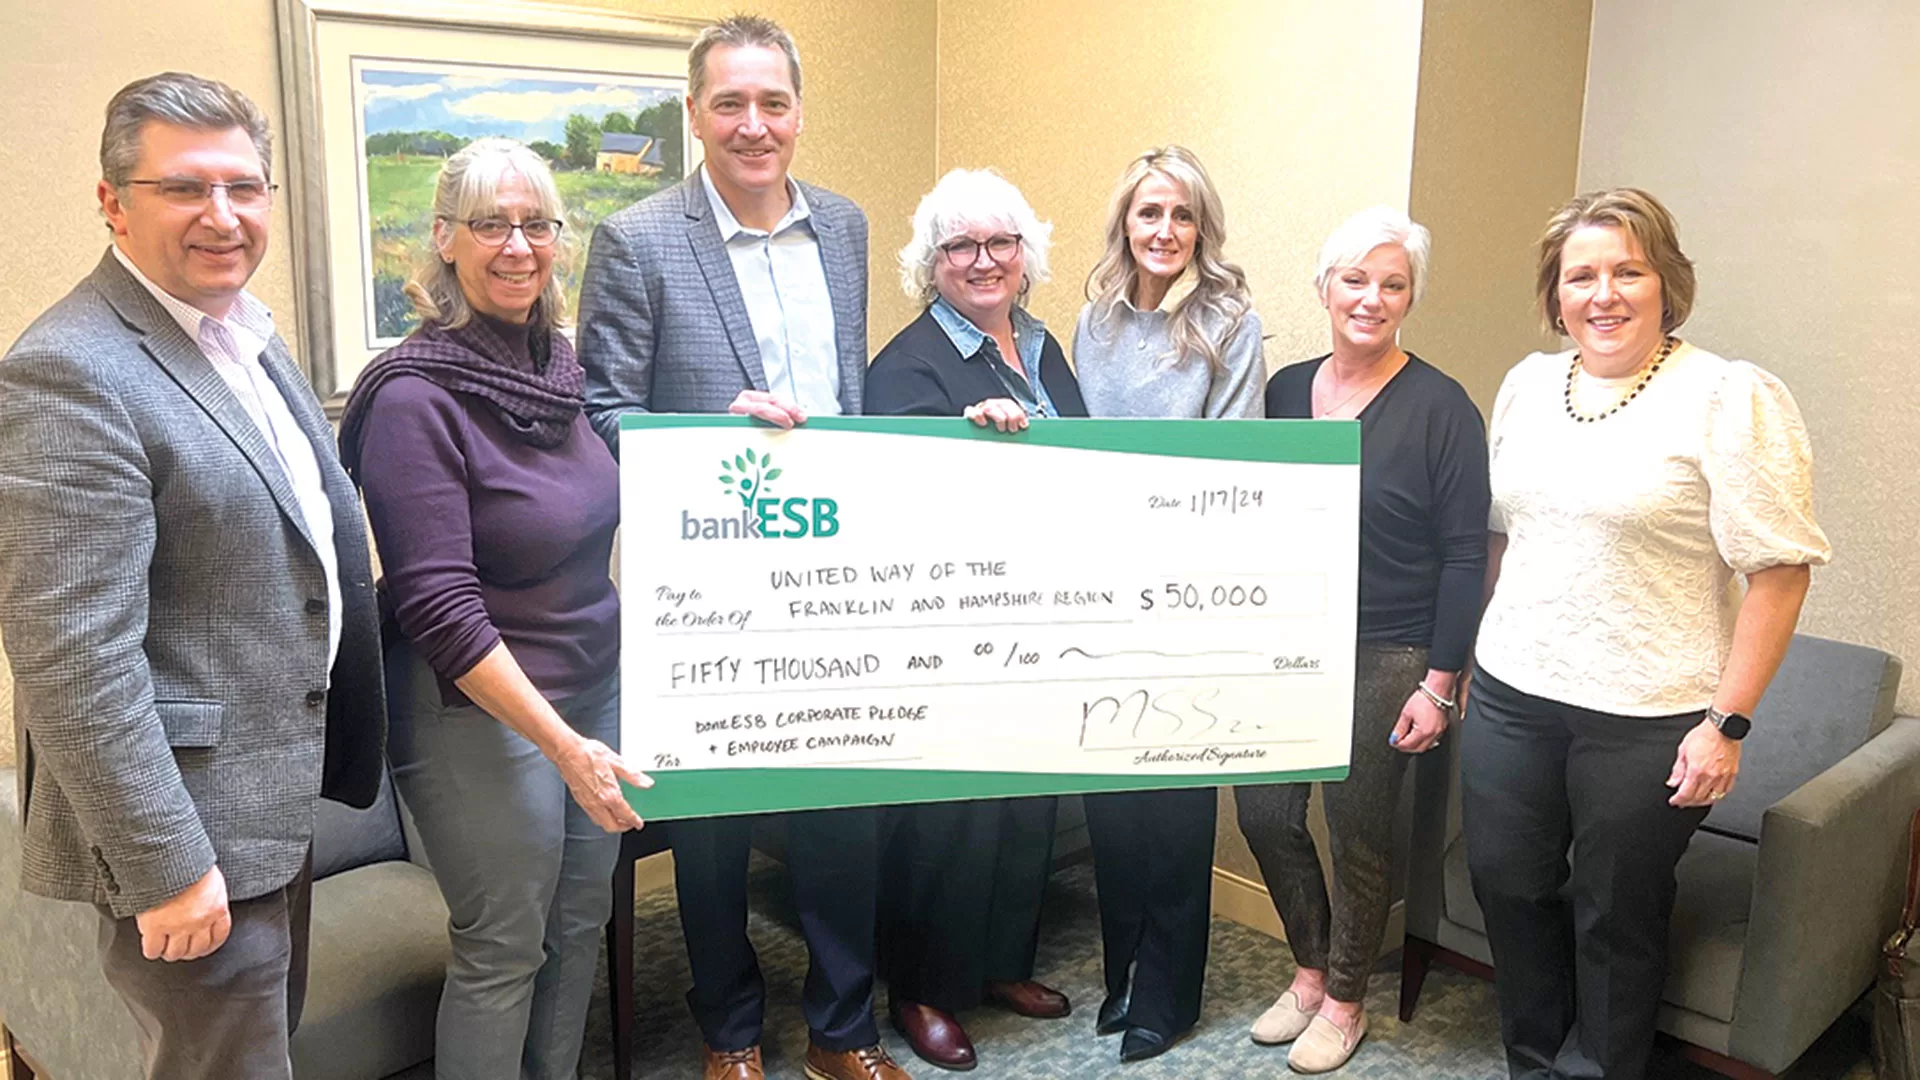 Pictured: United Way of the Franklin & Hampshire Region Director of Development Holly Martineau (center) flanked by, from left, bankESB’s Gary Turku, Marge Prendergast, President and CEO Matthew Sosik, Jessica West, Dena Hall, and Bozena Dabek.